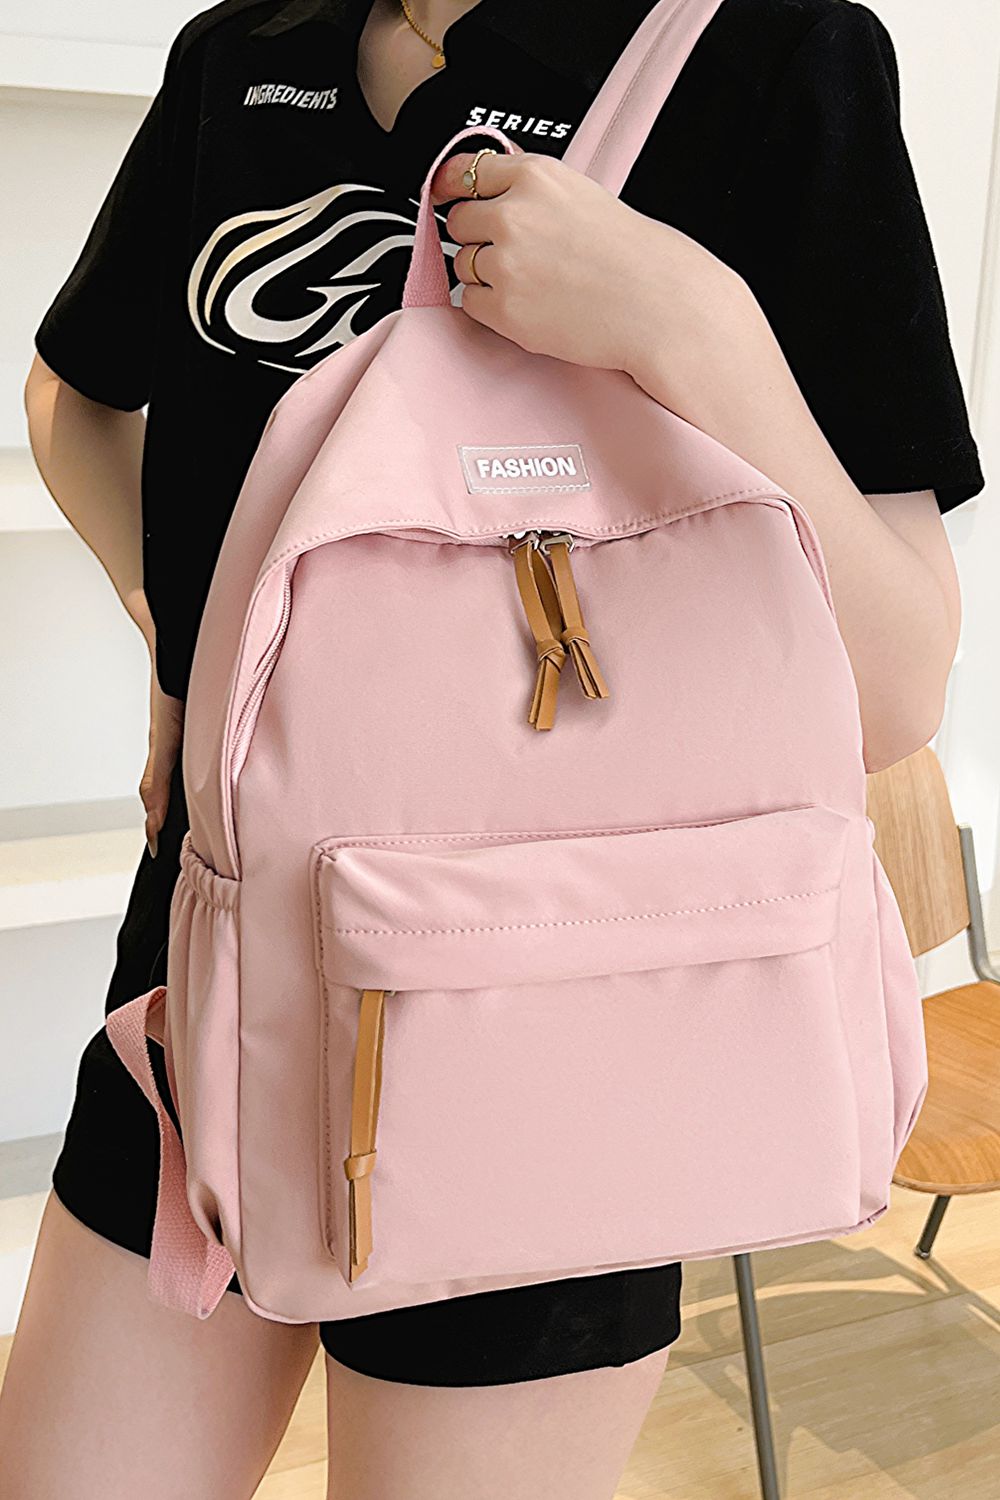 FASHION Polyester Lilac Lavender Backpack